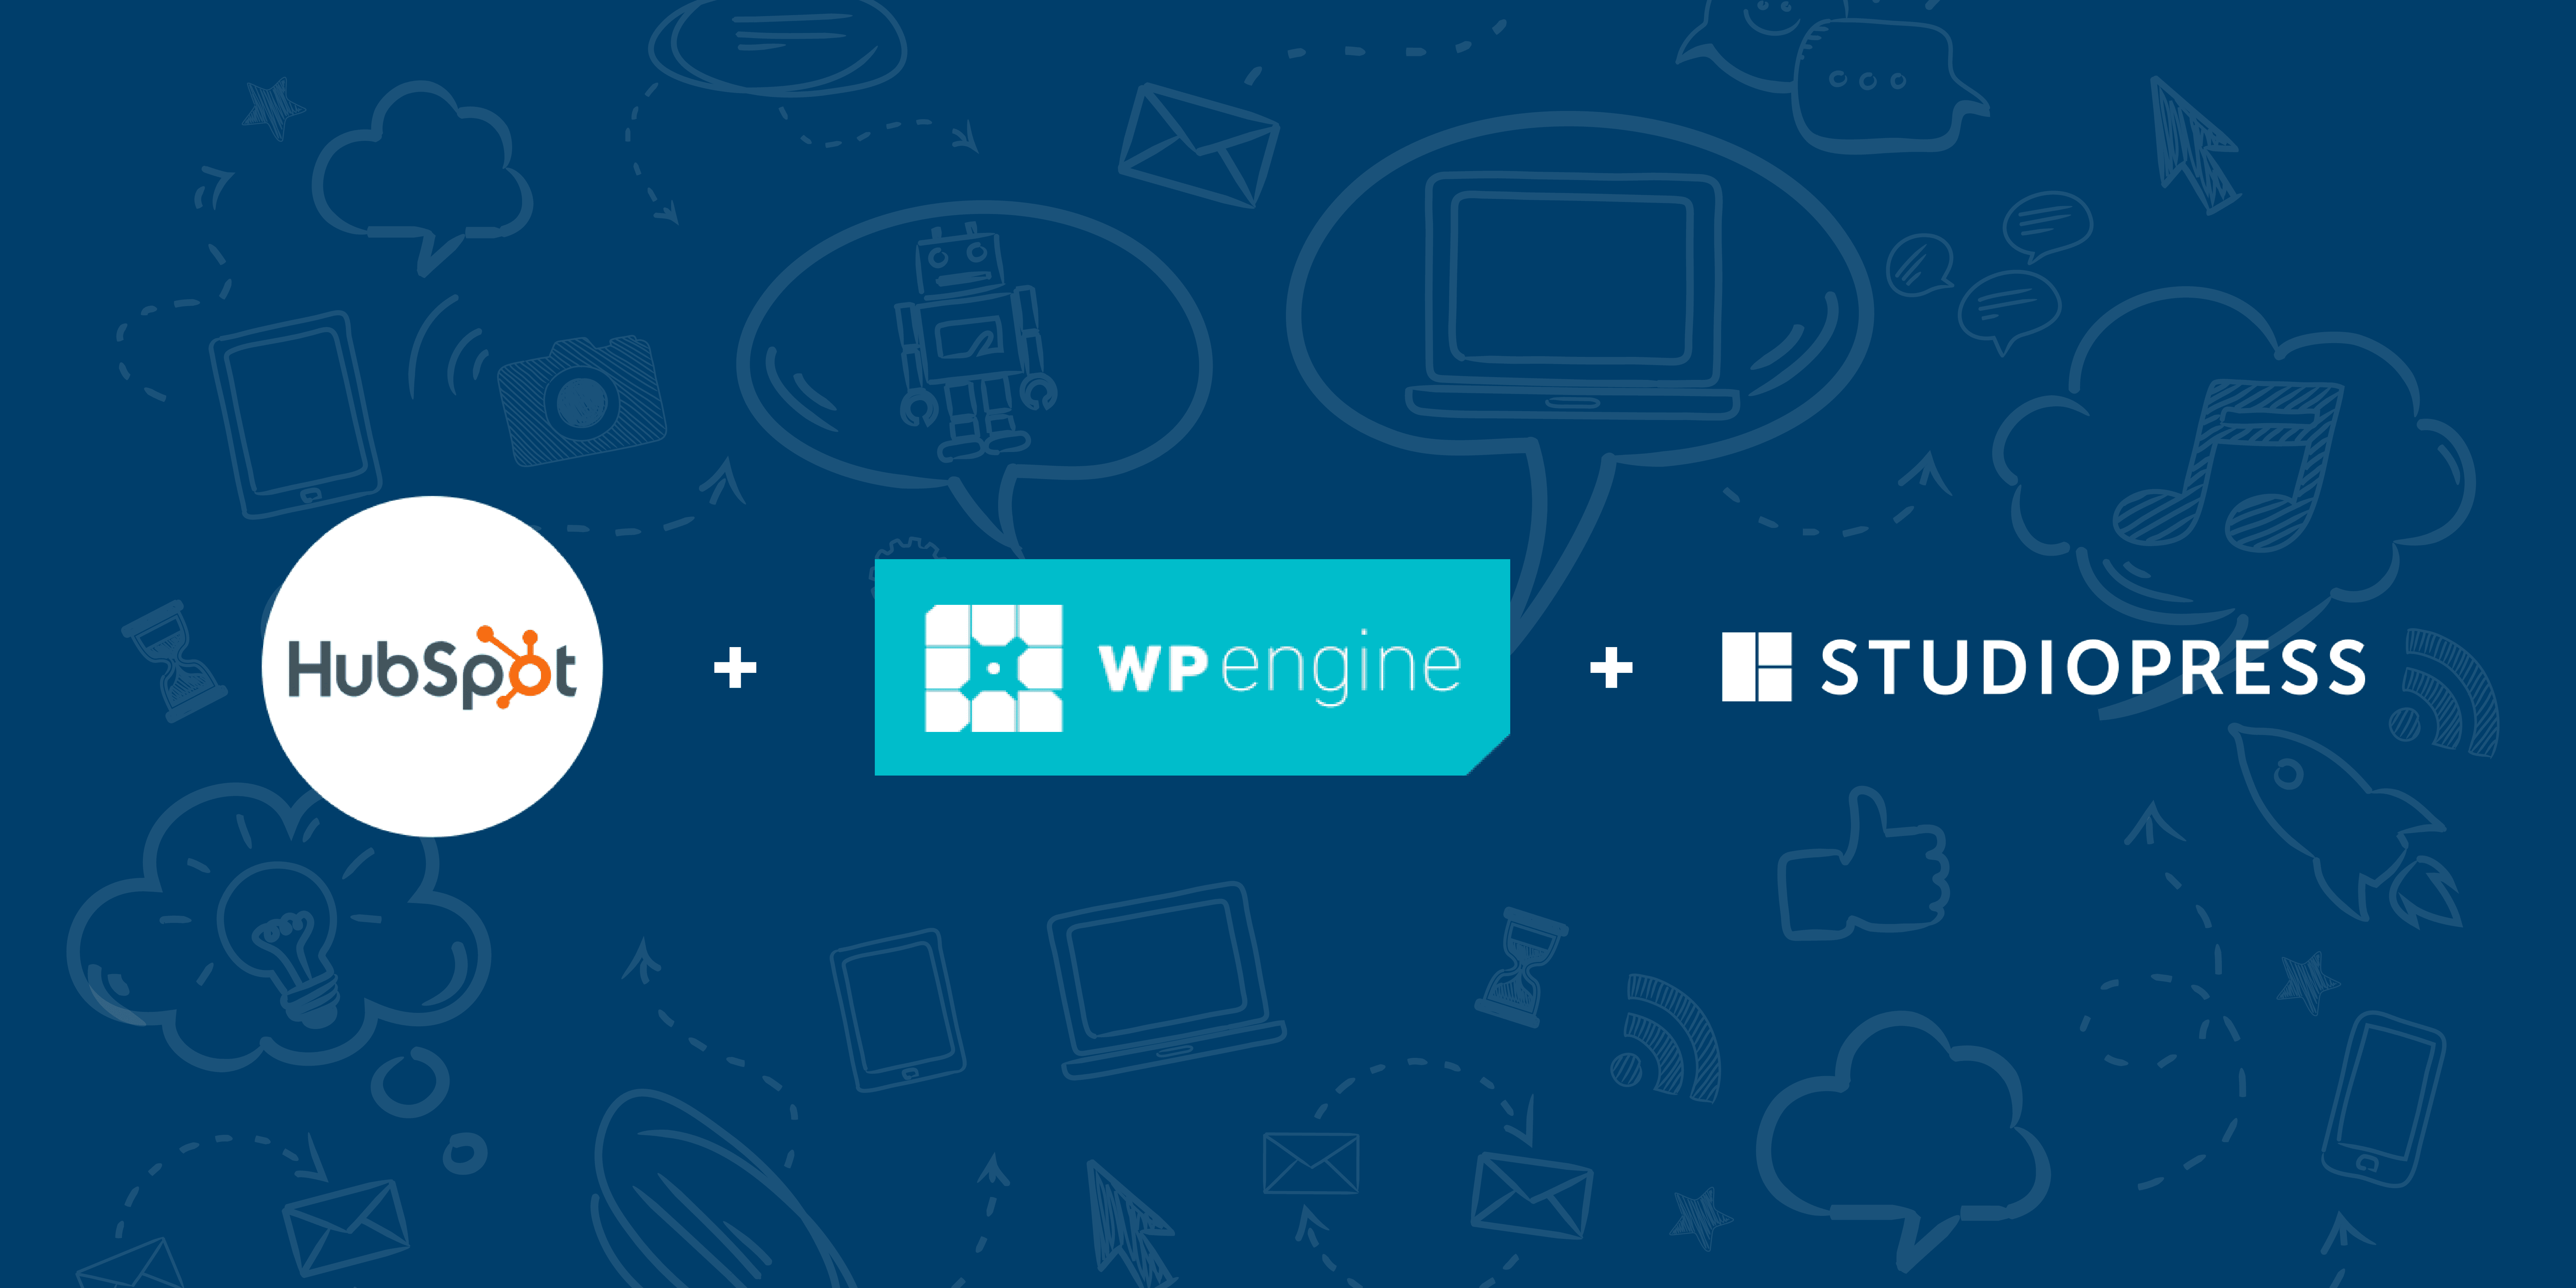 hubspot and wp engine